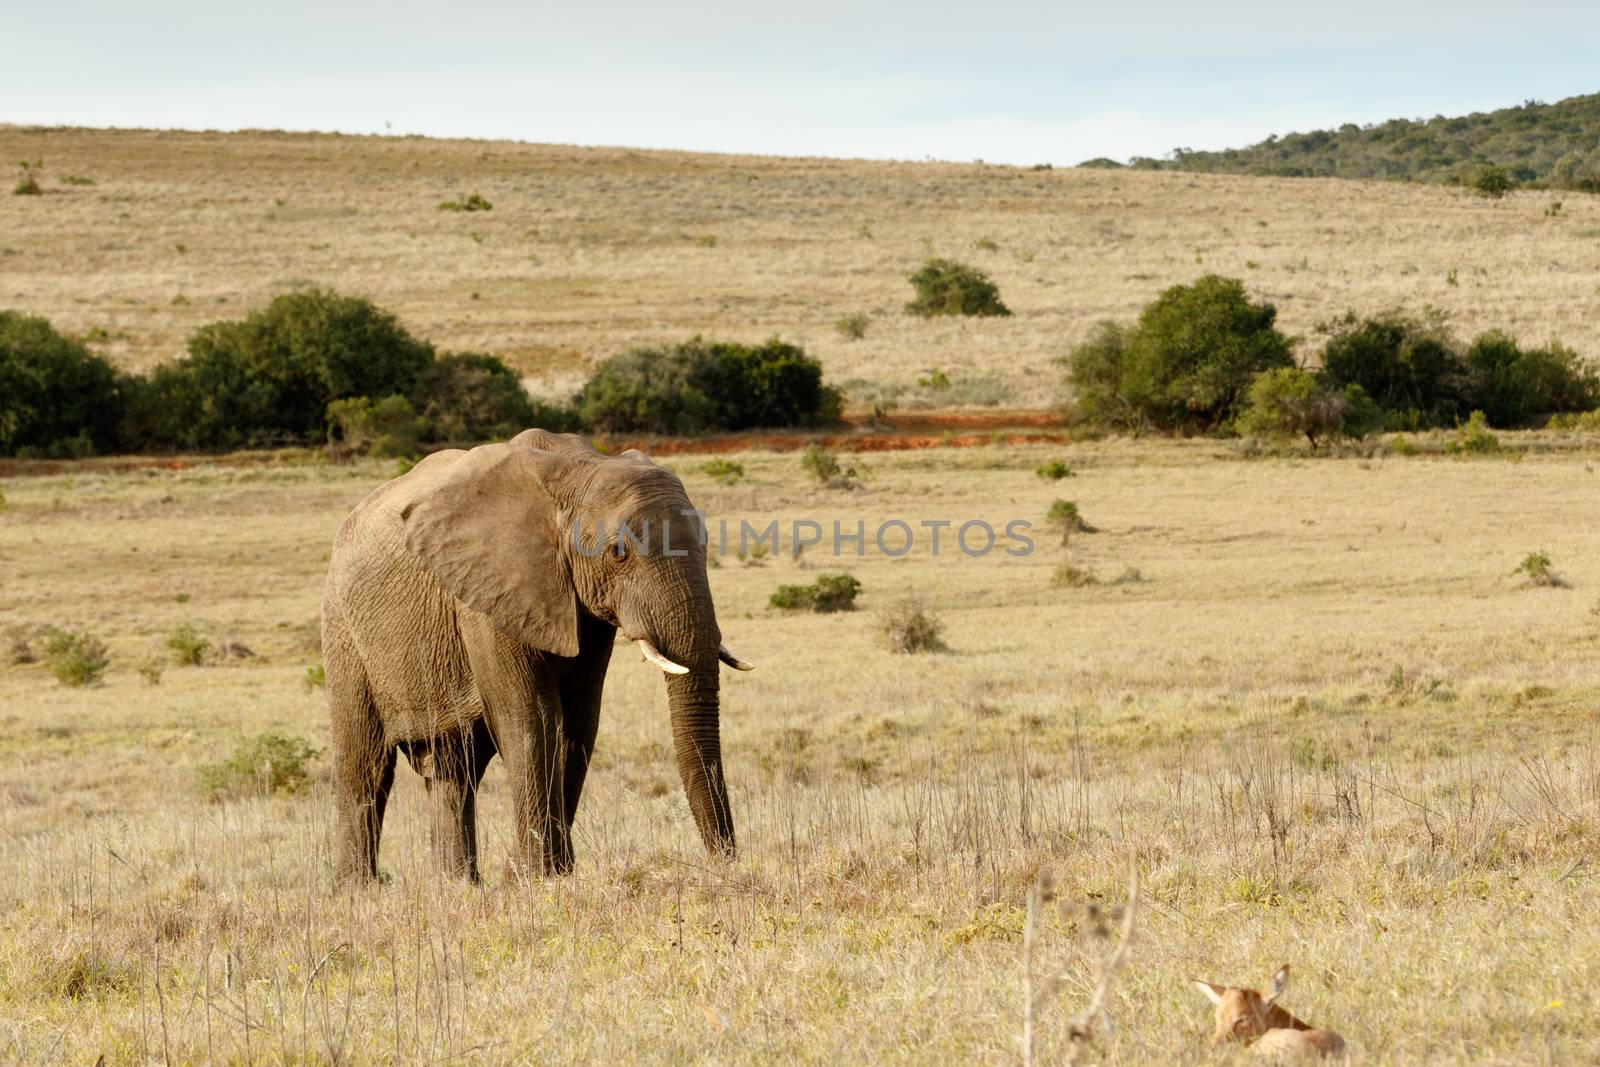 The African elephant in a open golden field.